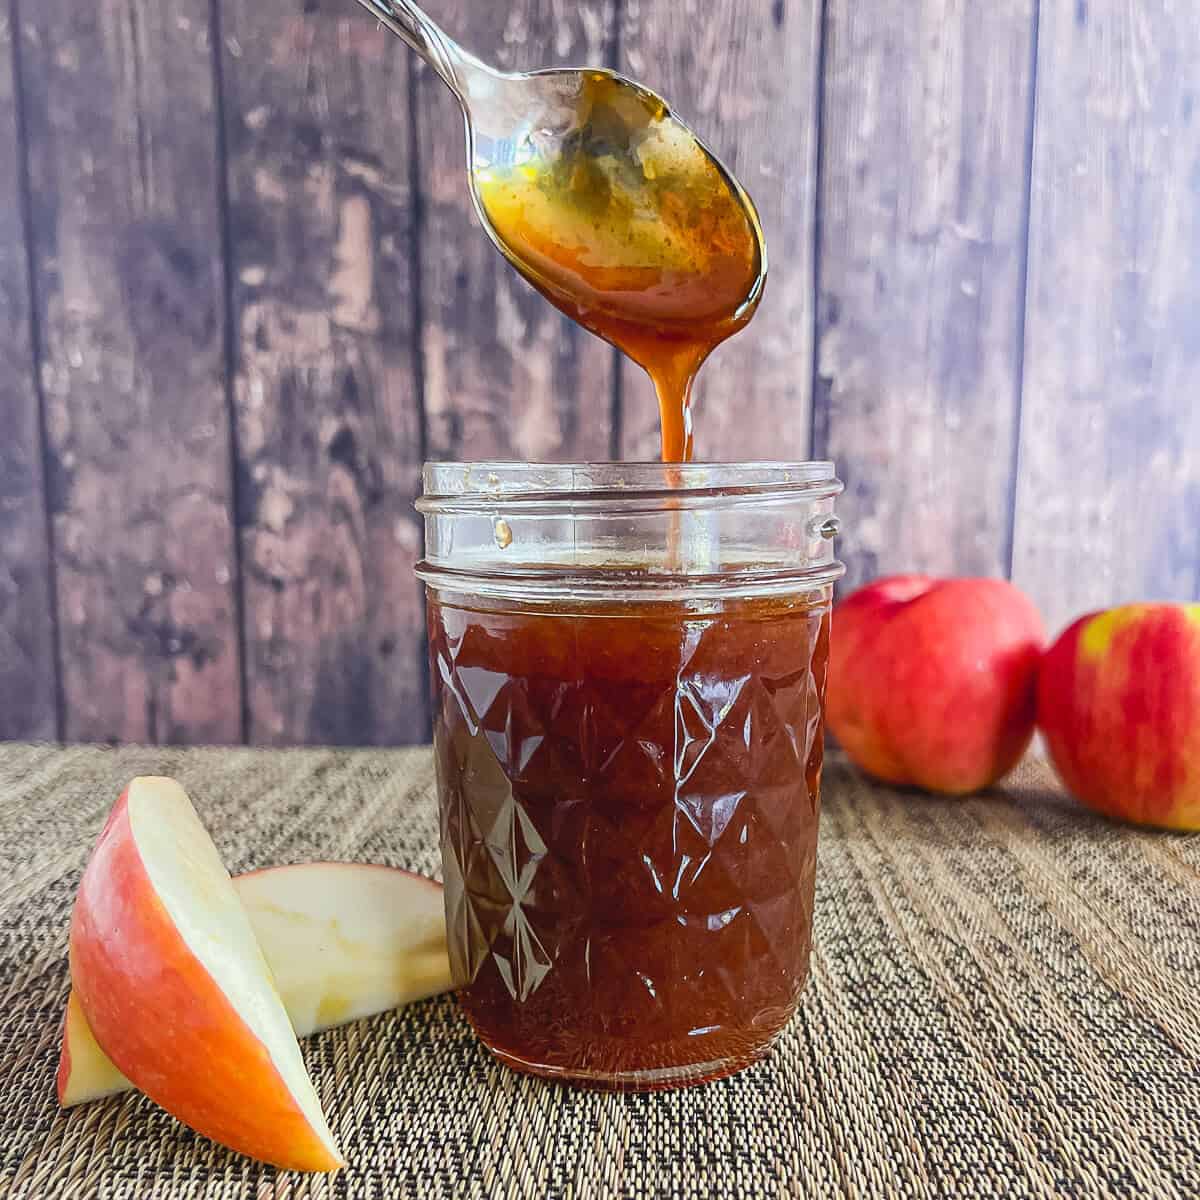 Boiled apple cider dripping from a spoon into a glass jar surrounded by apples.